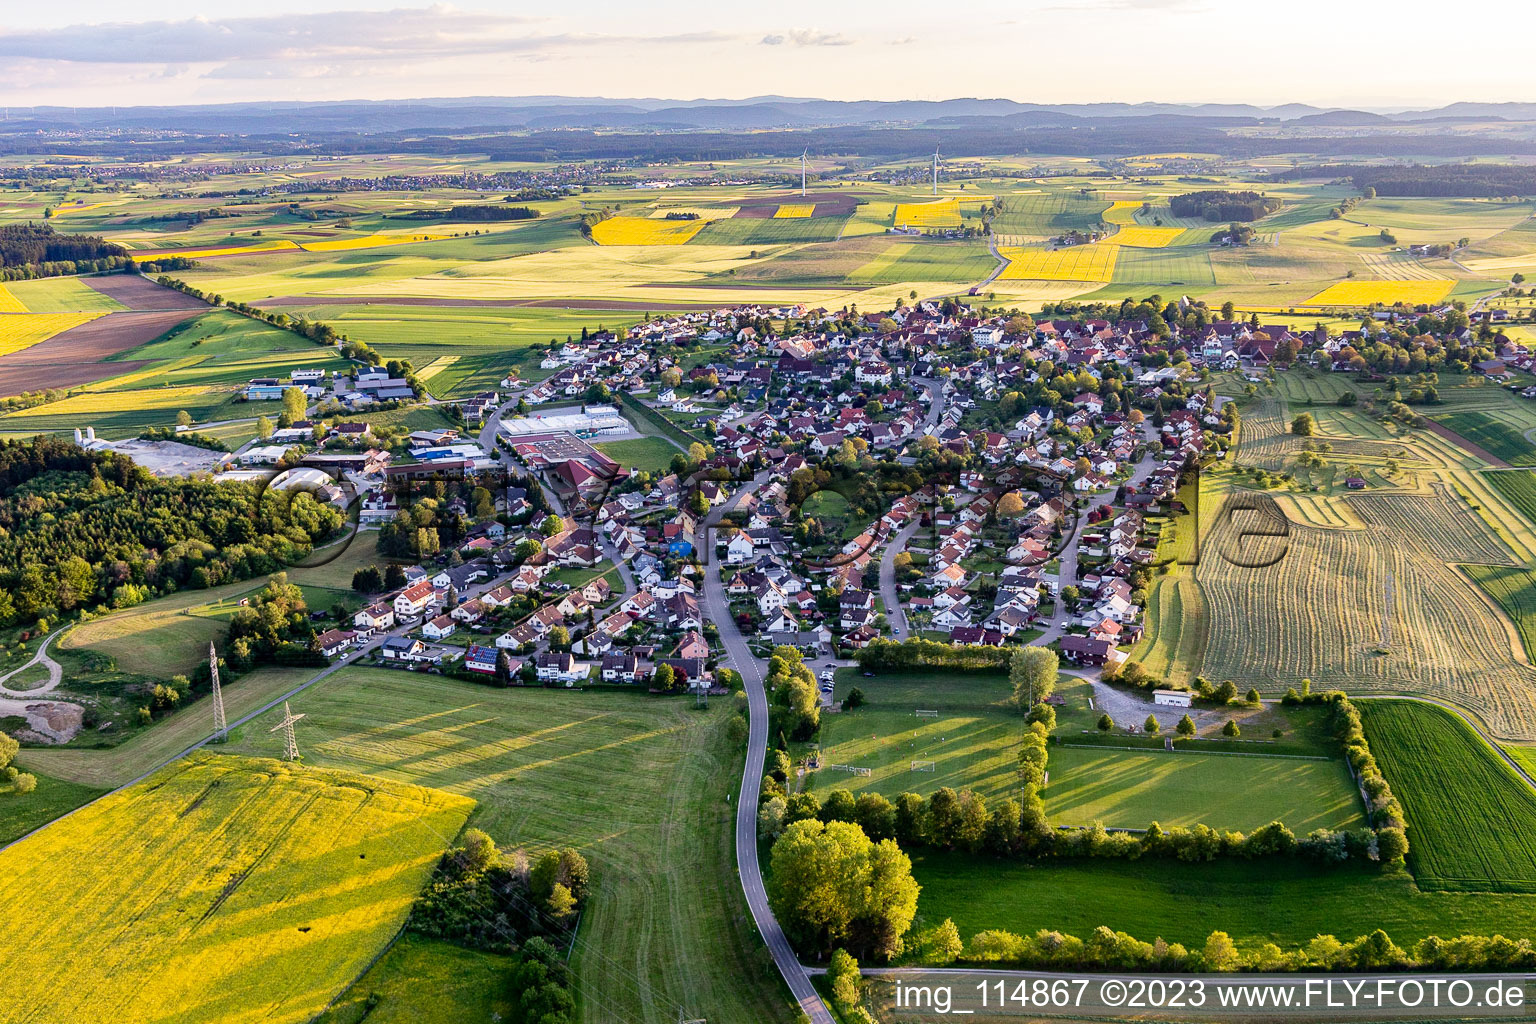 Agricultural land and field borders surround the settlement area of the village in Hochmoessingen in the state Baden-Wurttemberg, Germany